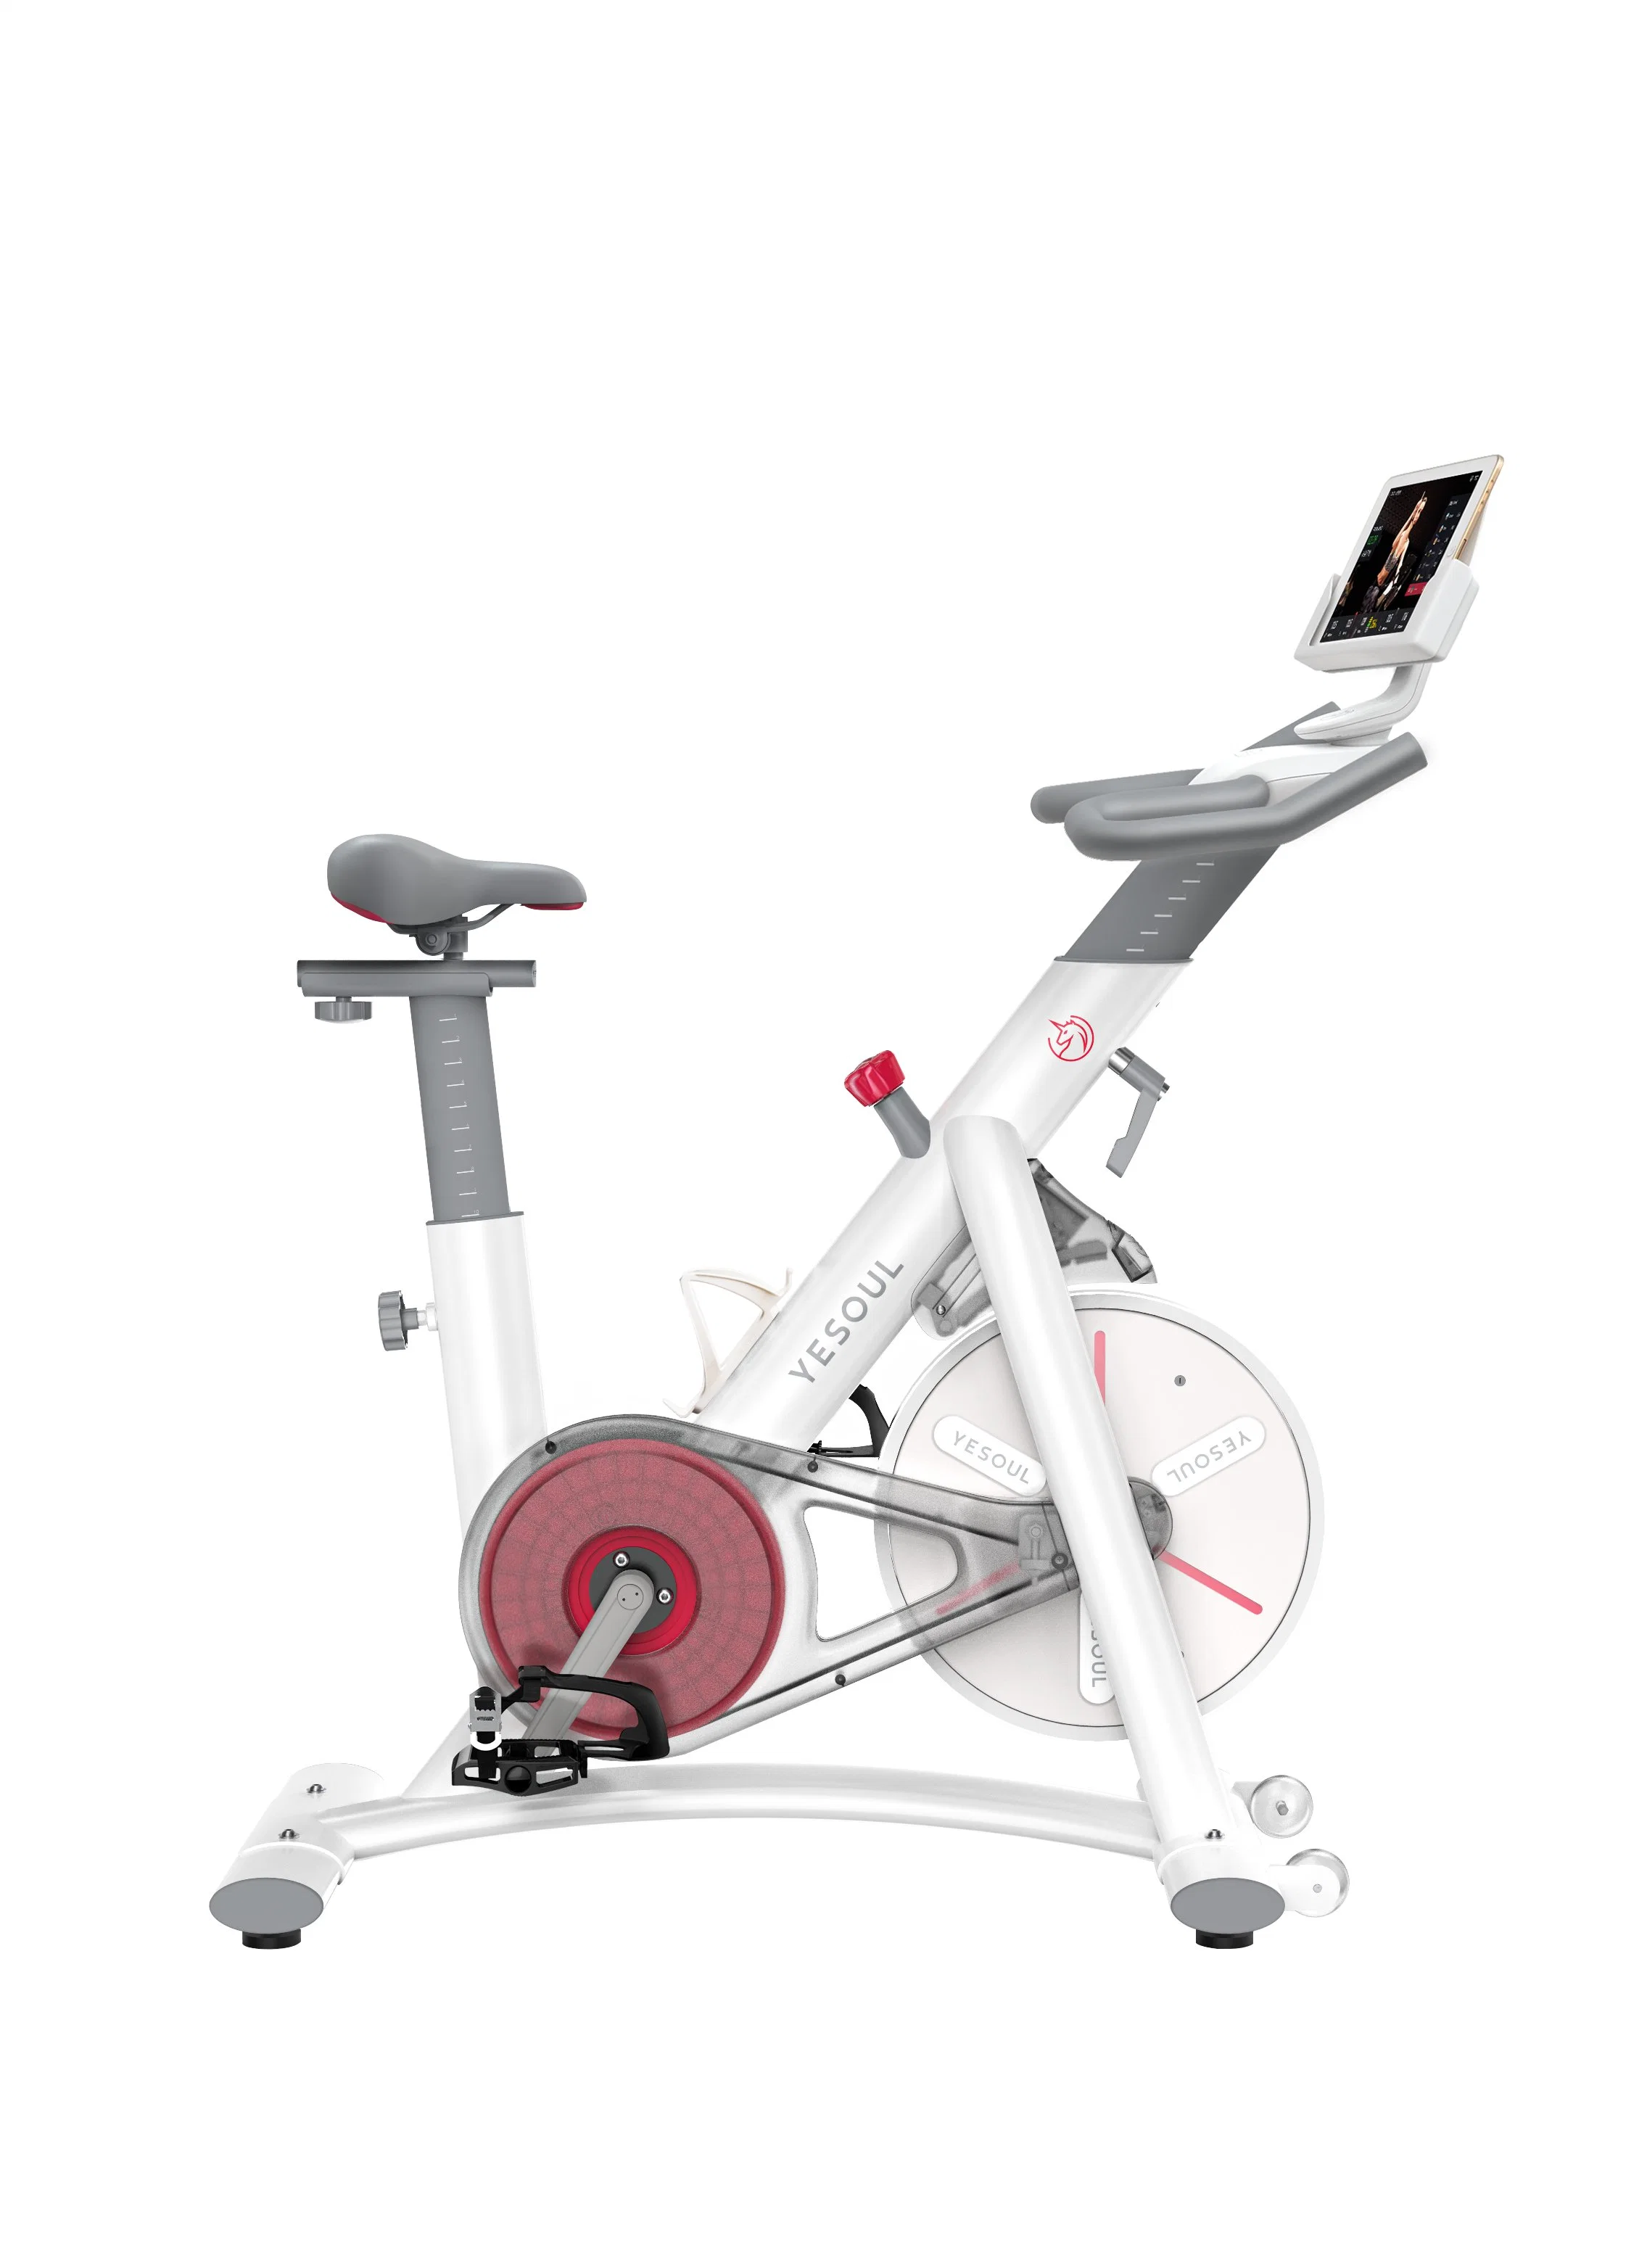 Yesoul Spinnig Indoor Cycling/Exercise Bike Fitness/Fitness Bike Equipment